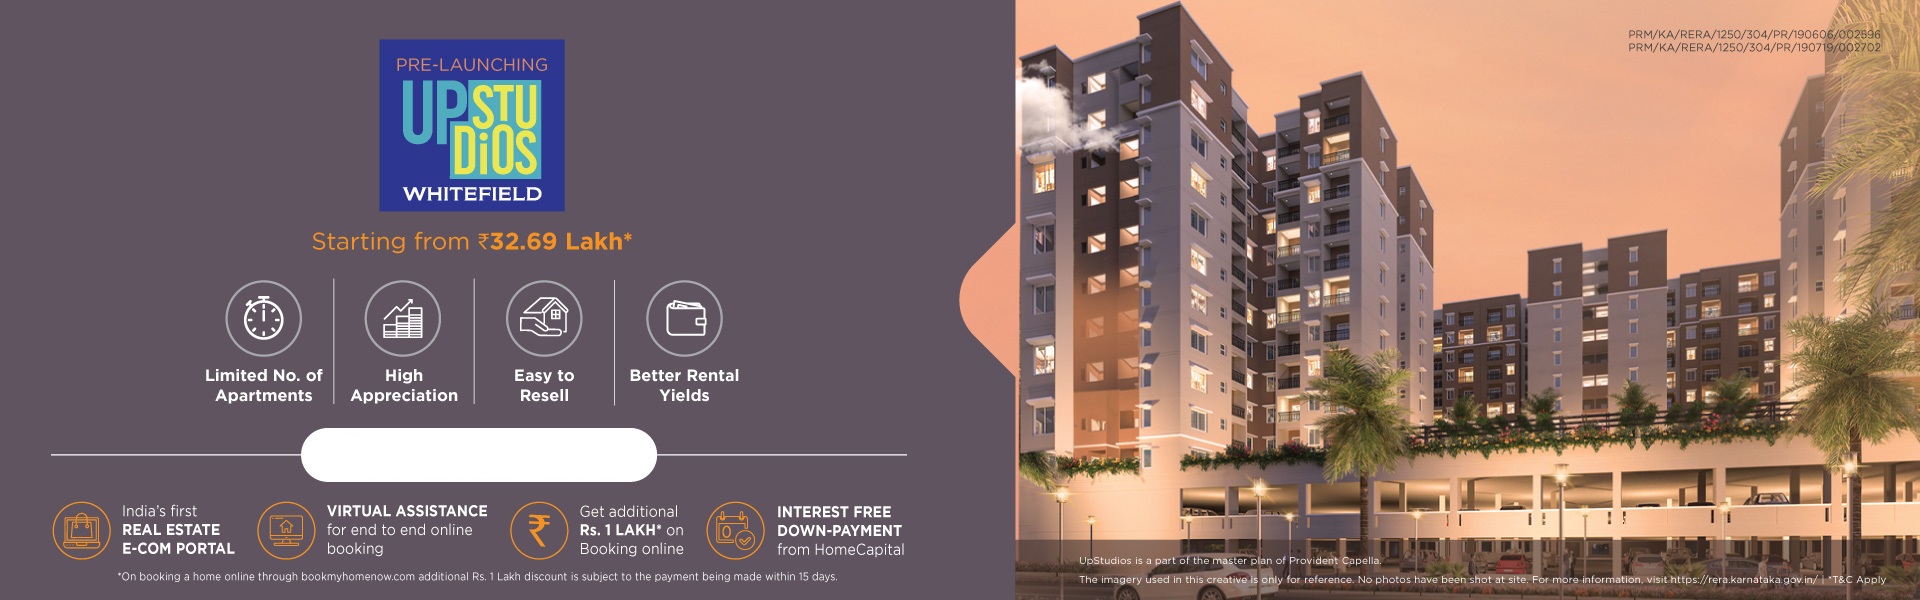 Pre-launching price Rs 32.69 Lac at Provident Upstudios, Bangalore Update